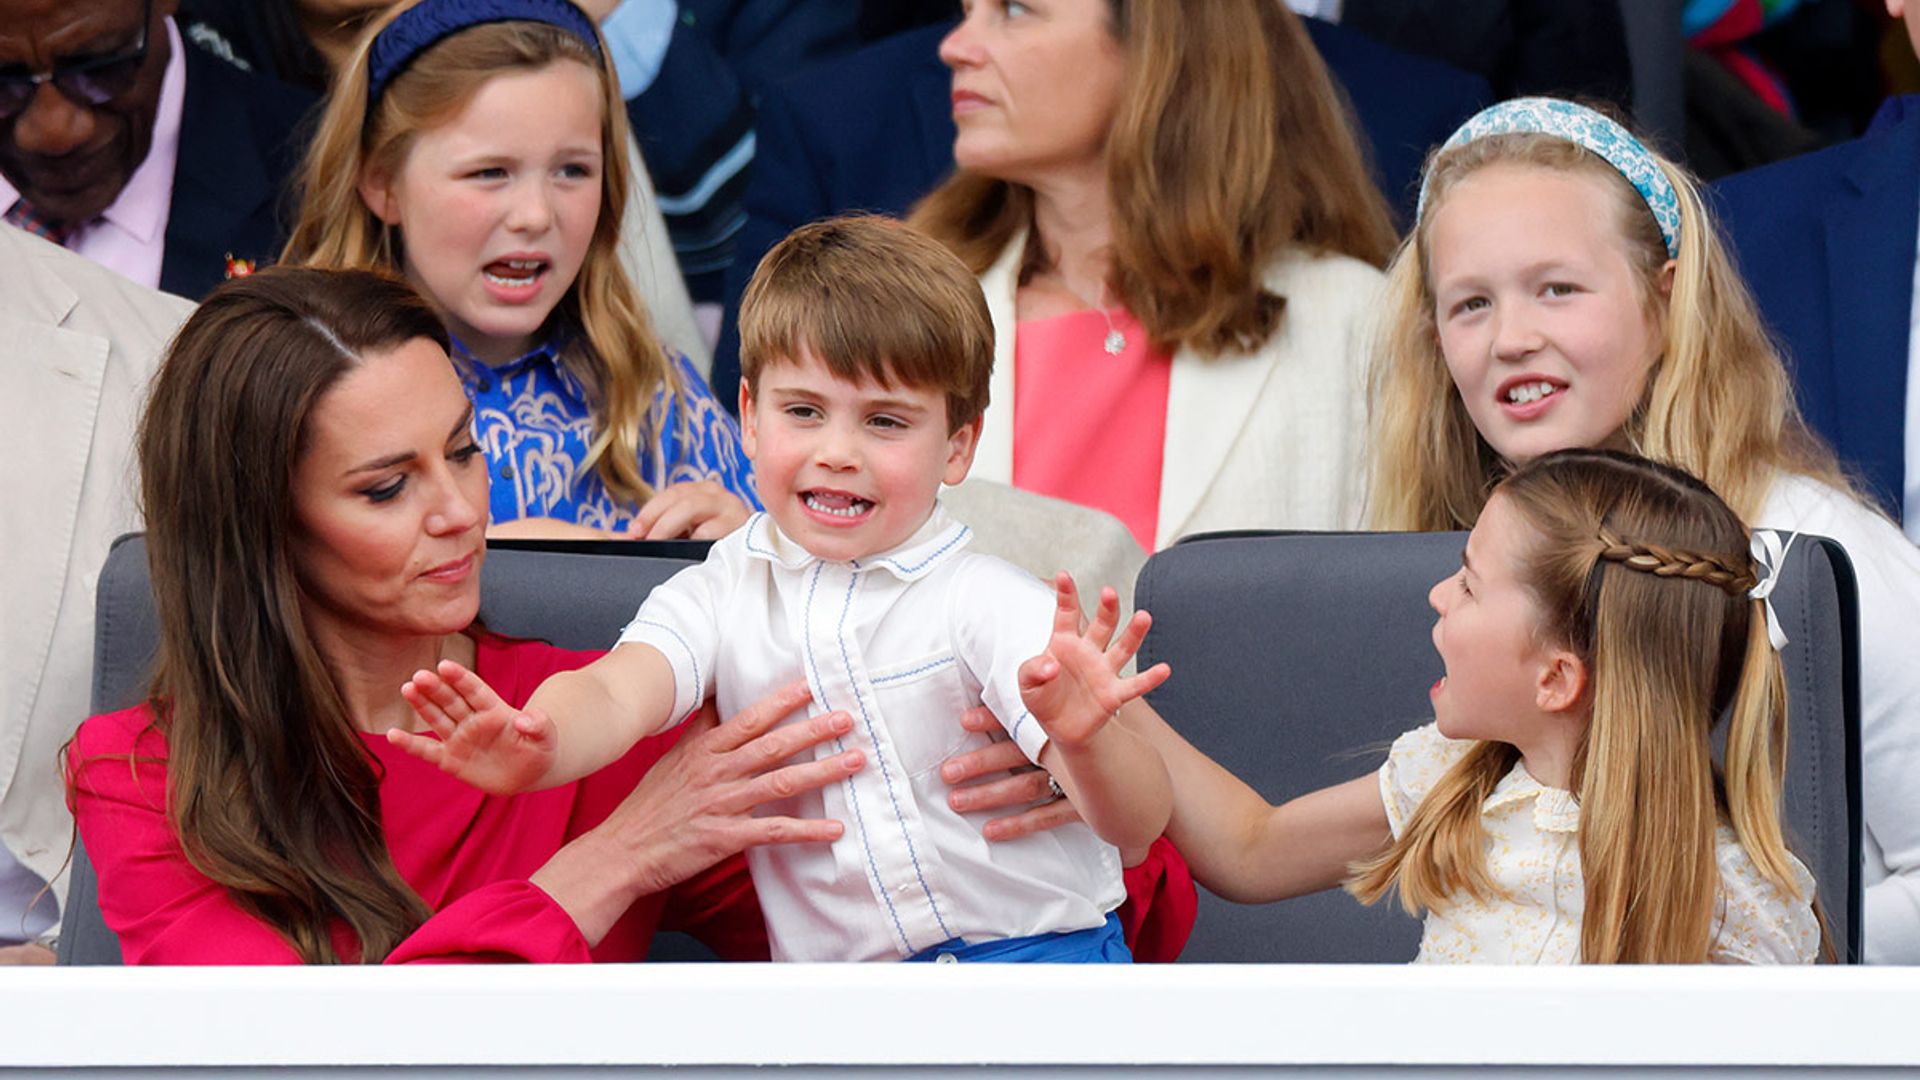 Kate Middleton's nanny helps look after George, Charlotte and Louis at Jubilee pageant – see photo